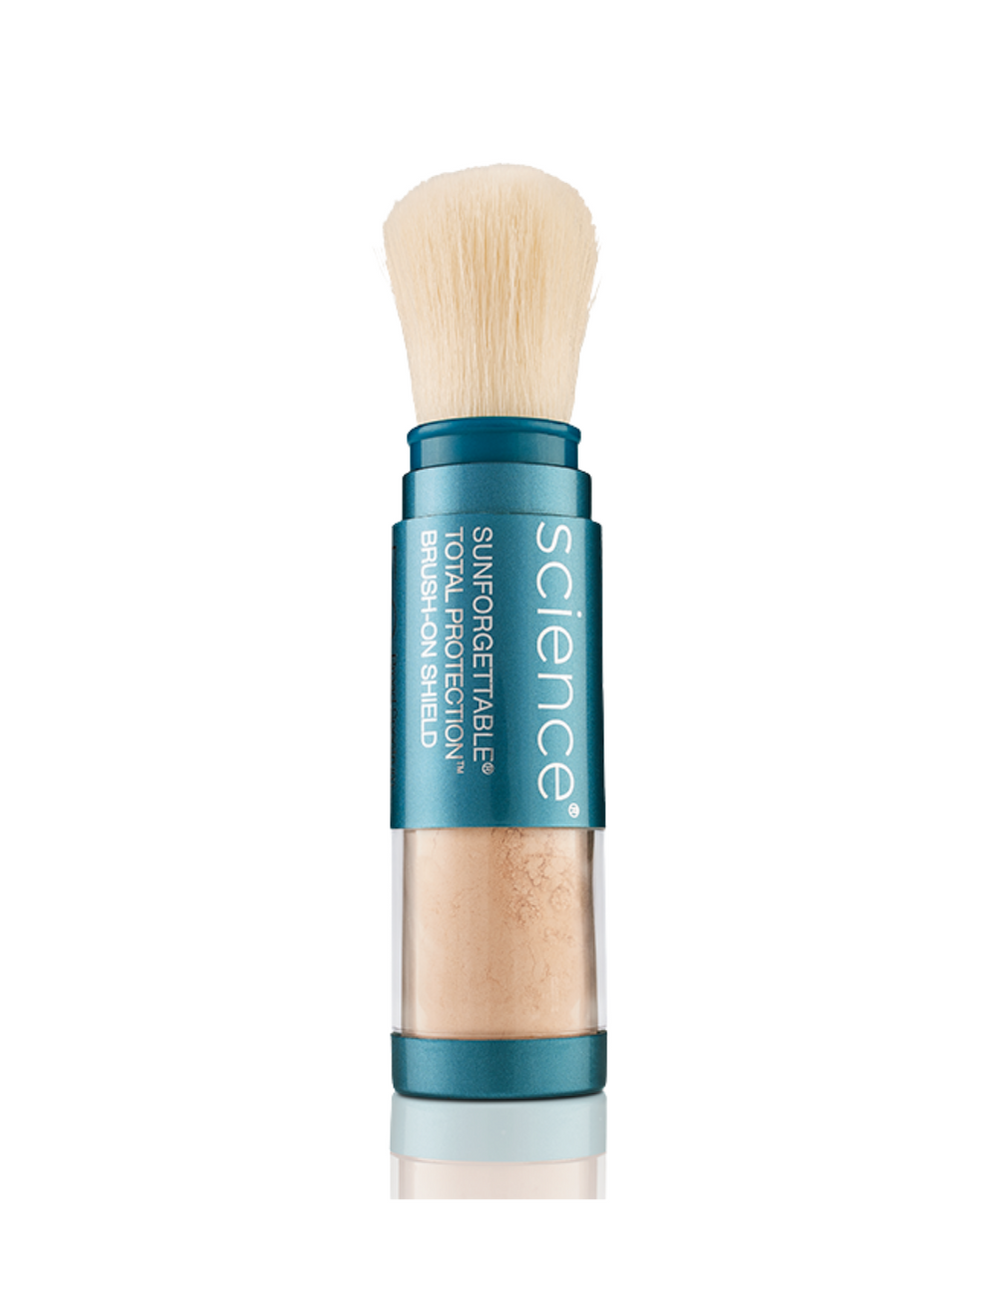 SUNFORGETTABLE® TOTAL PROTECTION™ BRUSH-ON SHIELD SPF 50